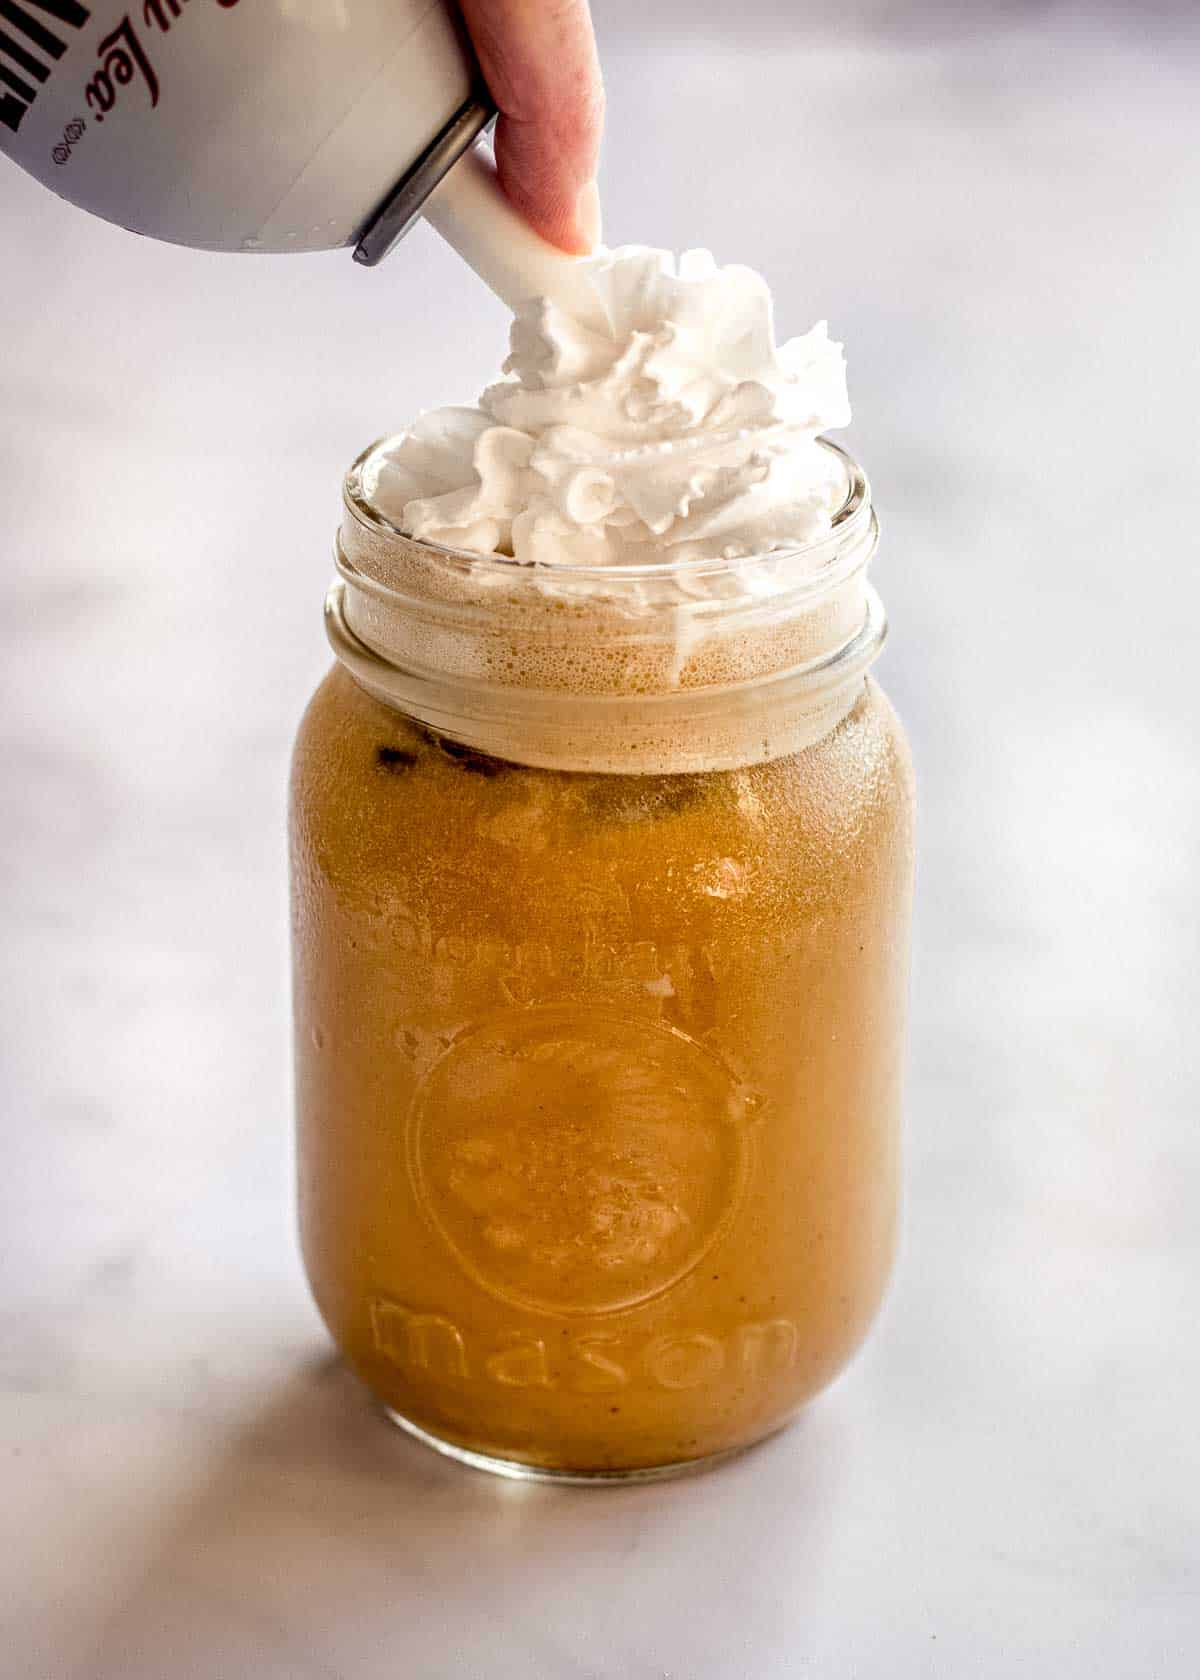 A woman's hand decorates iced pumpkin spiced latte in a glass with whipped cream from a can.